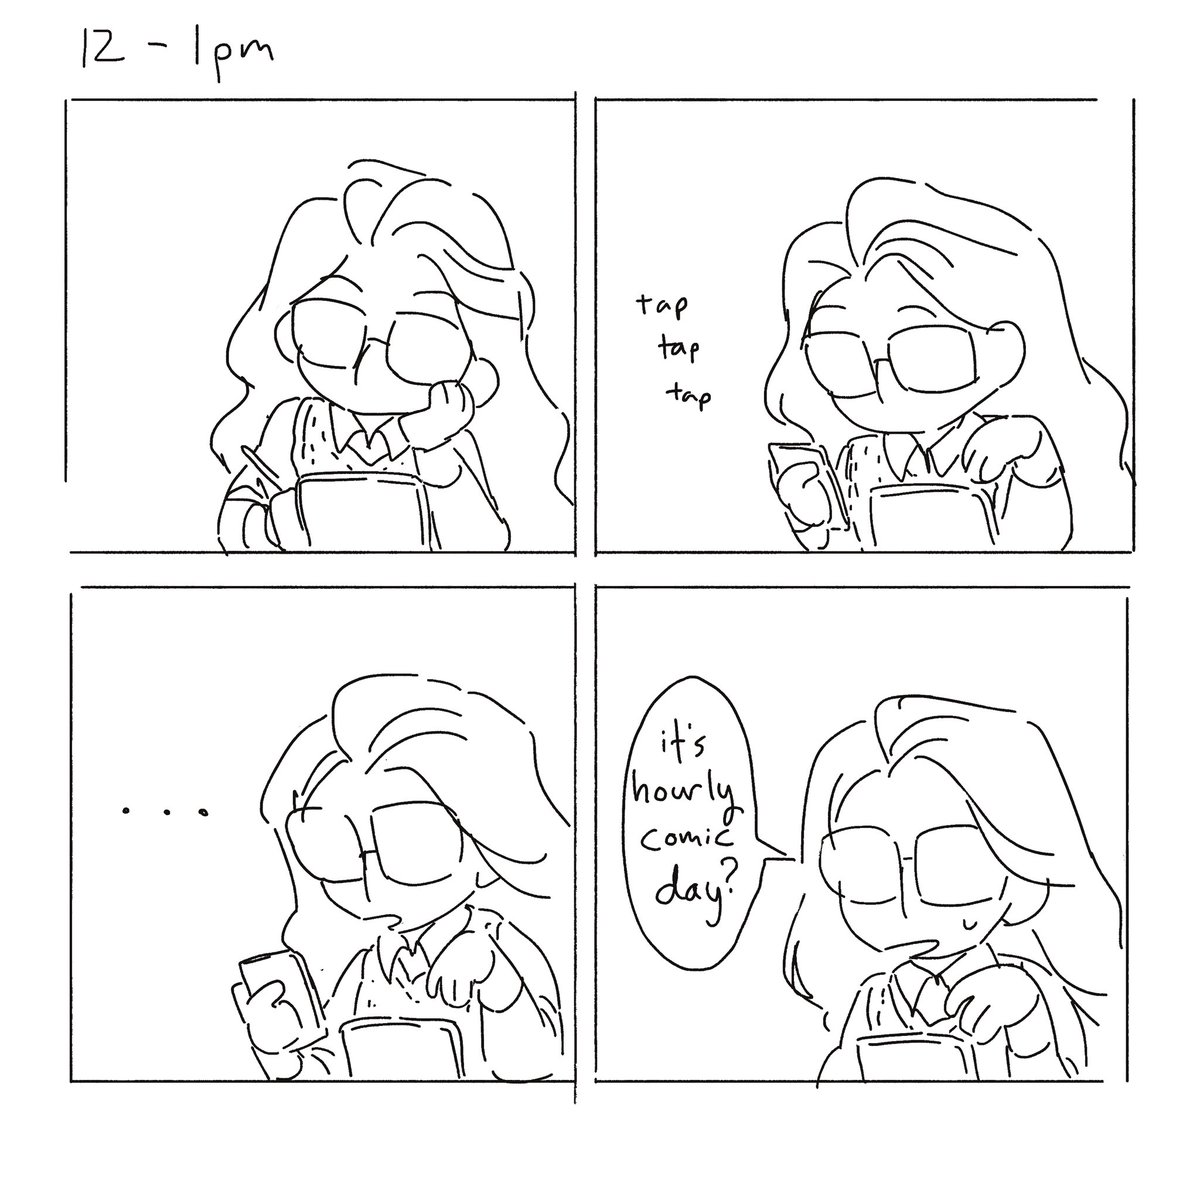 #hourlycomicday oops 